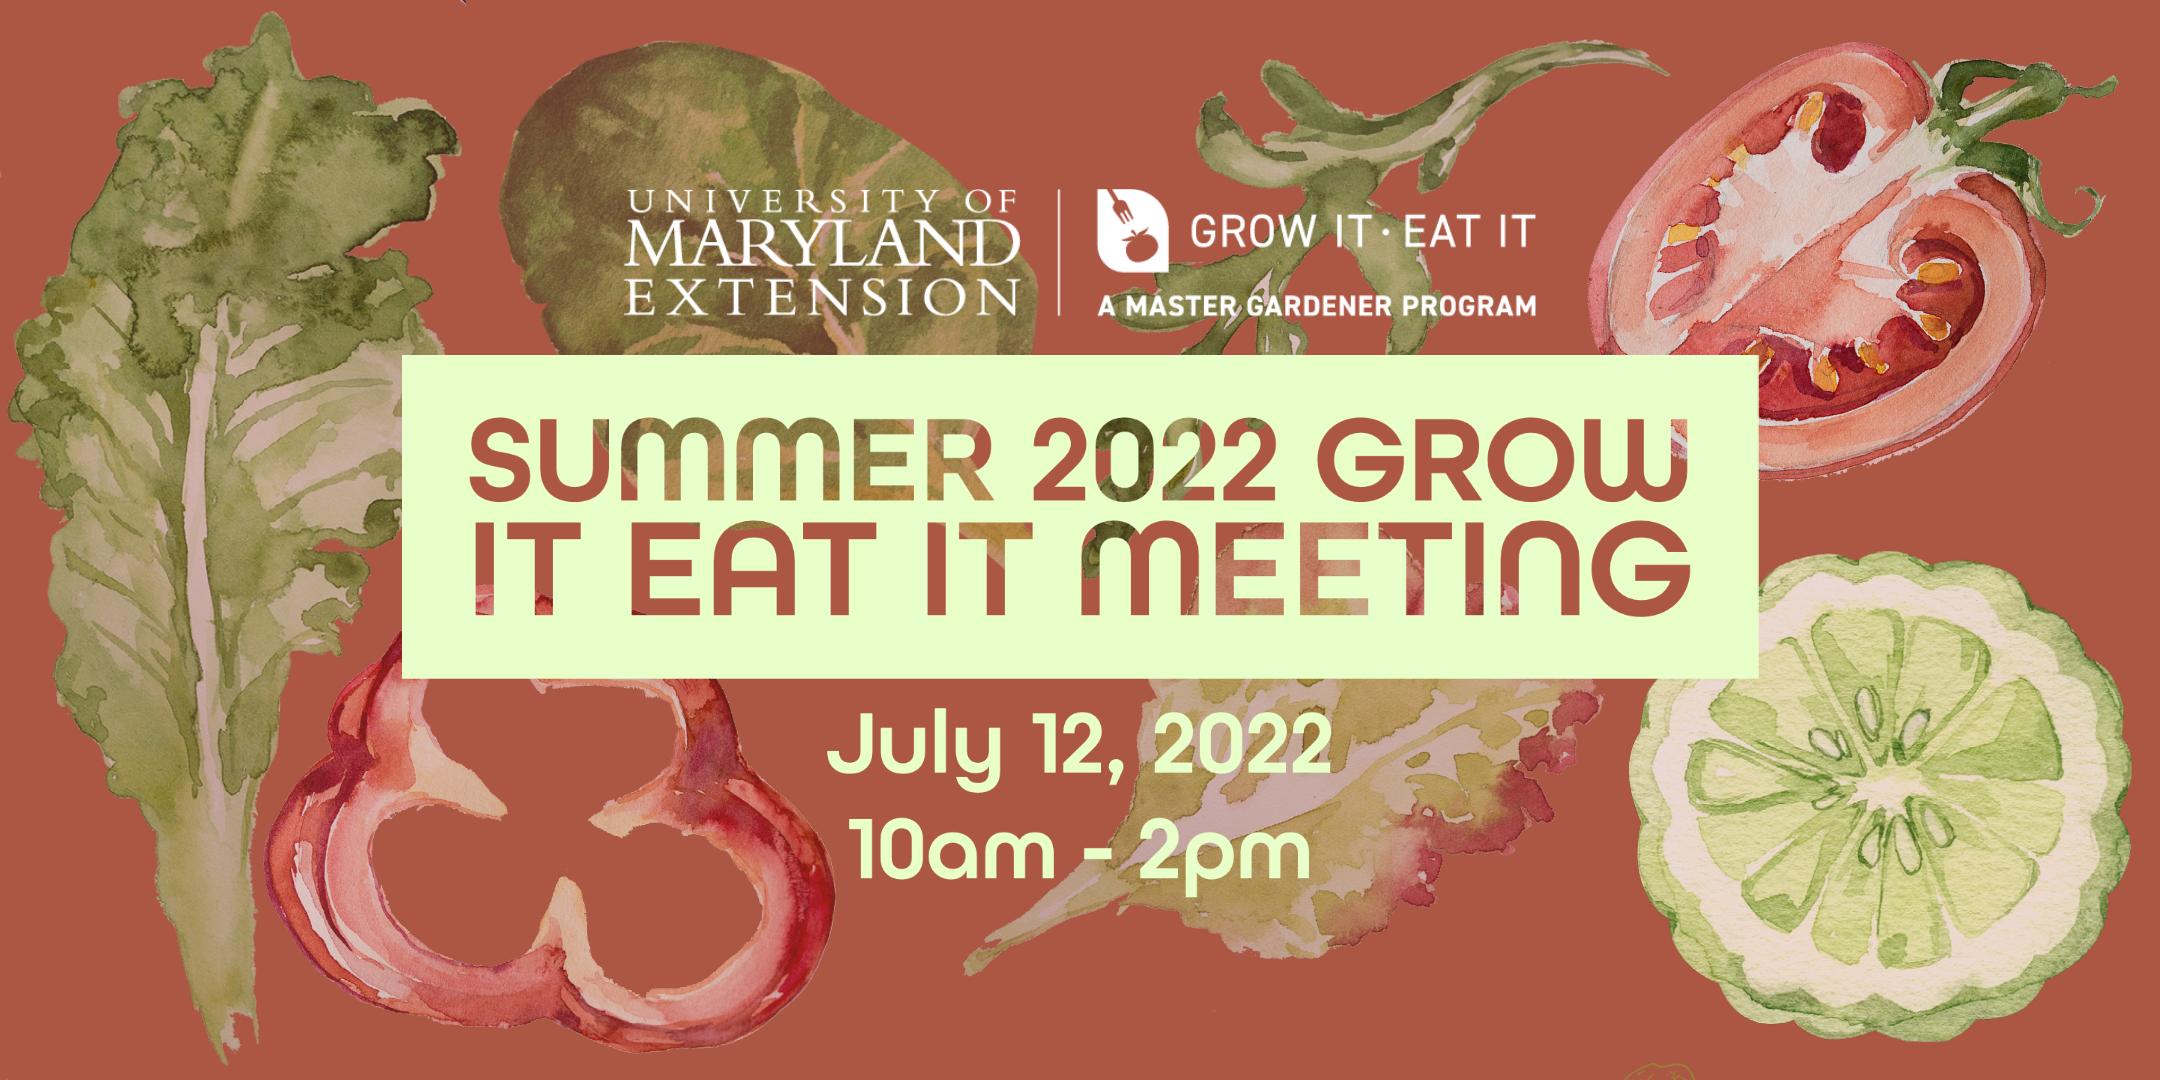 Event Graphic for Summer 2022 Grow It Eat It Meeting